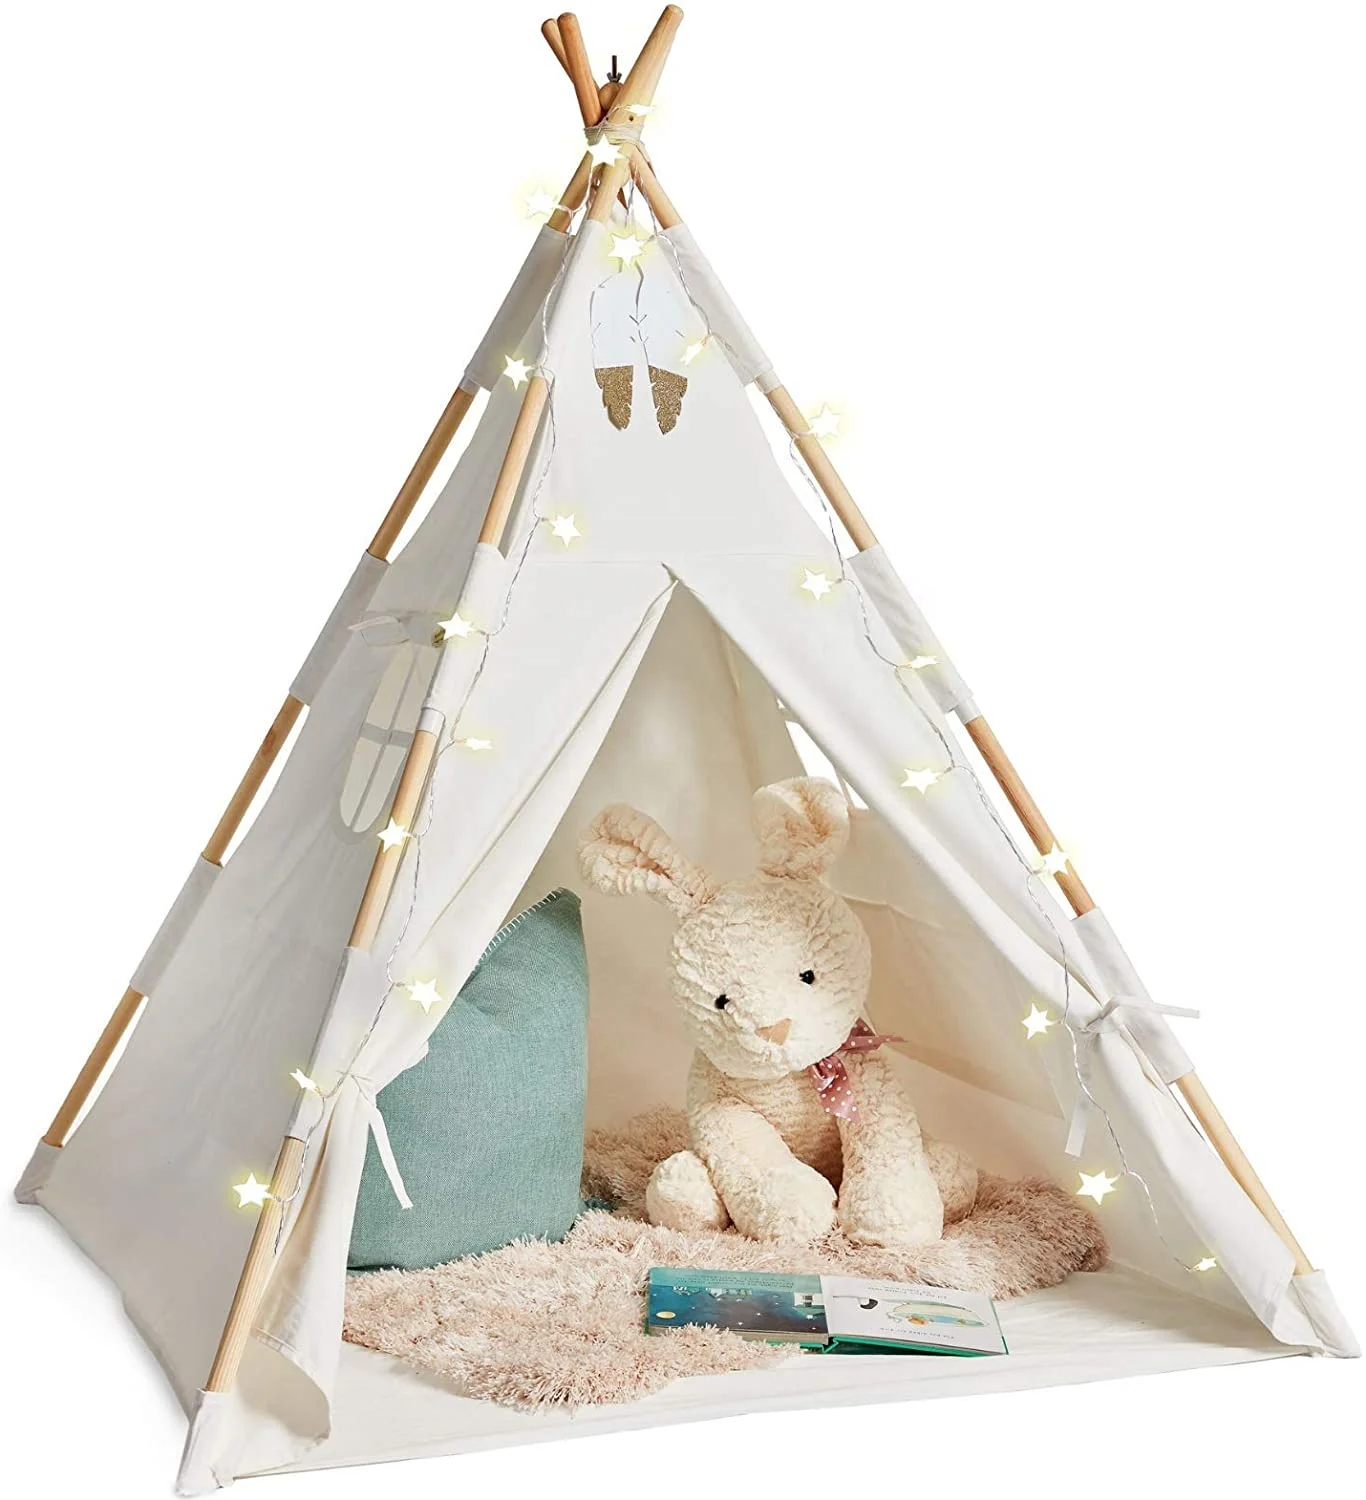 Pure Cotton Kids Tepee Tents Indoor for Boys and Girls with lights